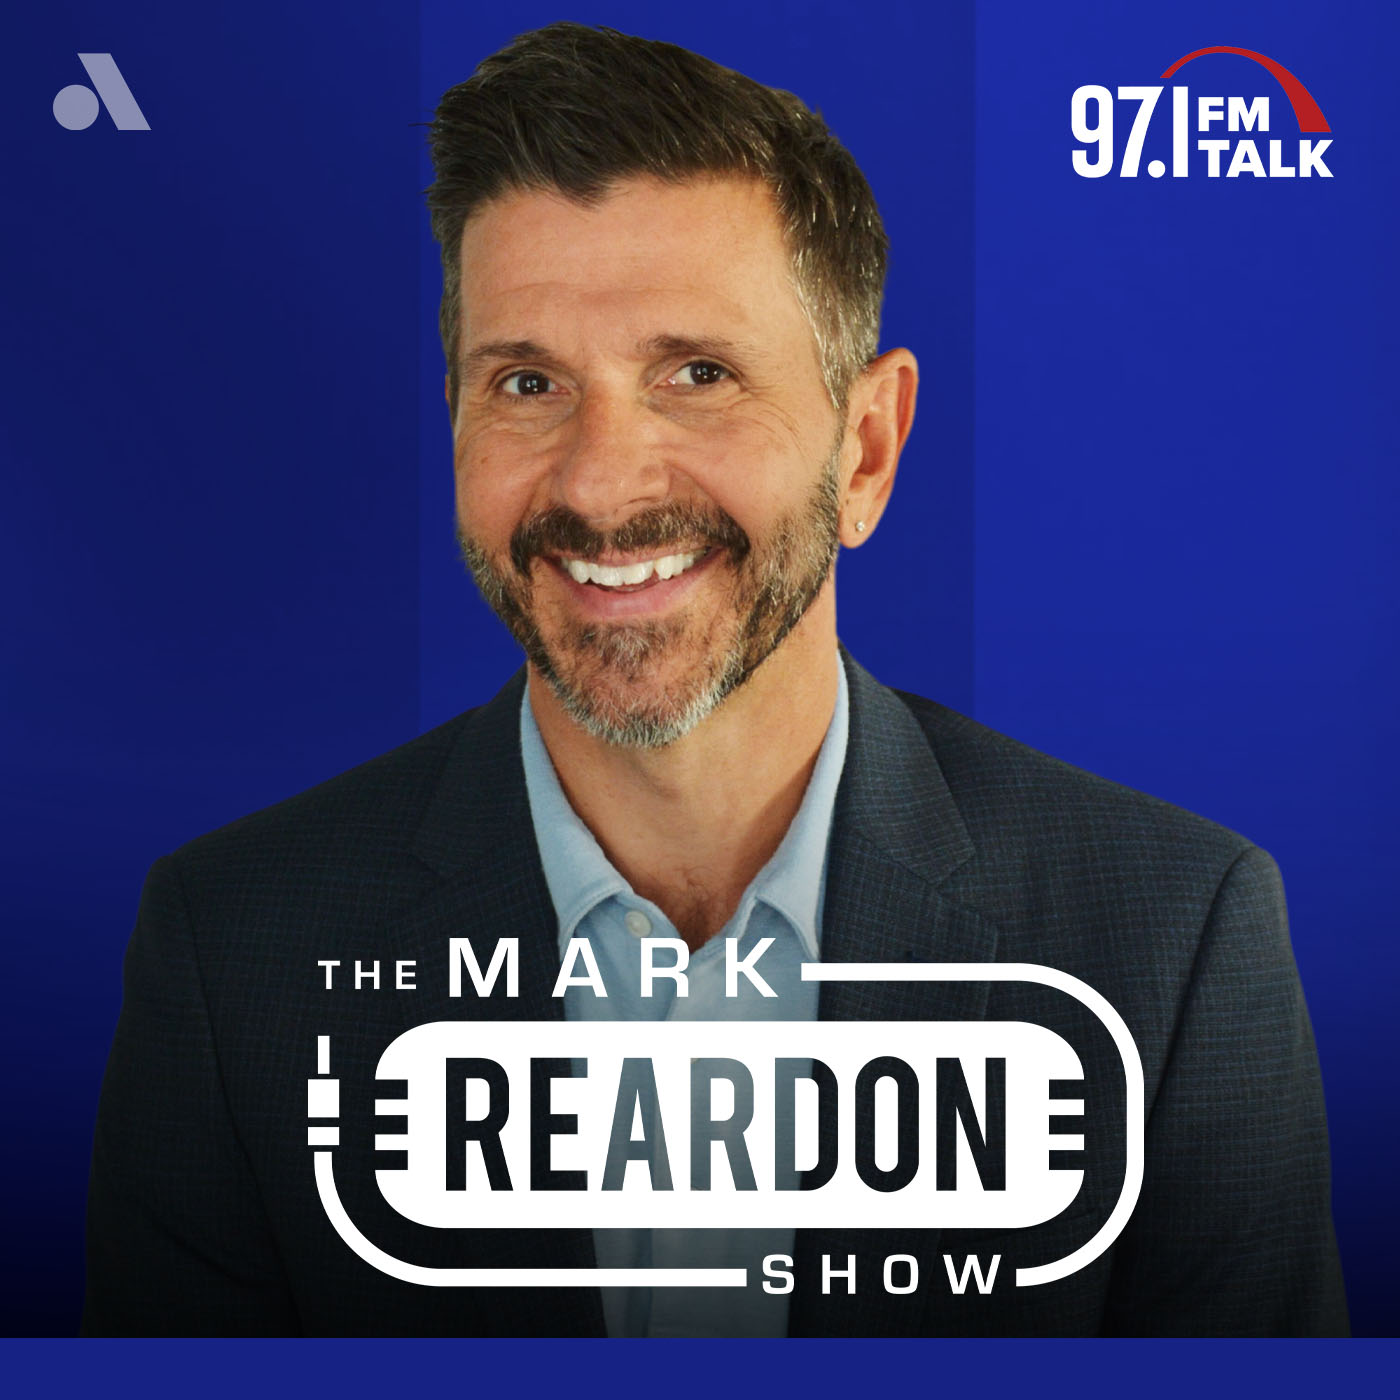 The Mark Reardon Show - October 22nd 2019 3PM Hour